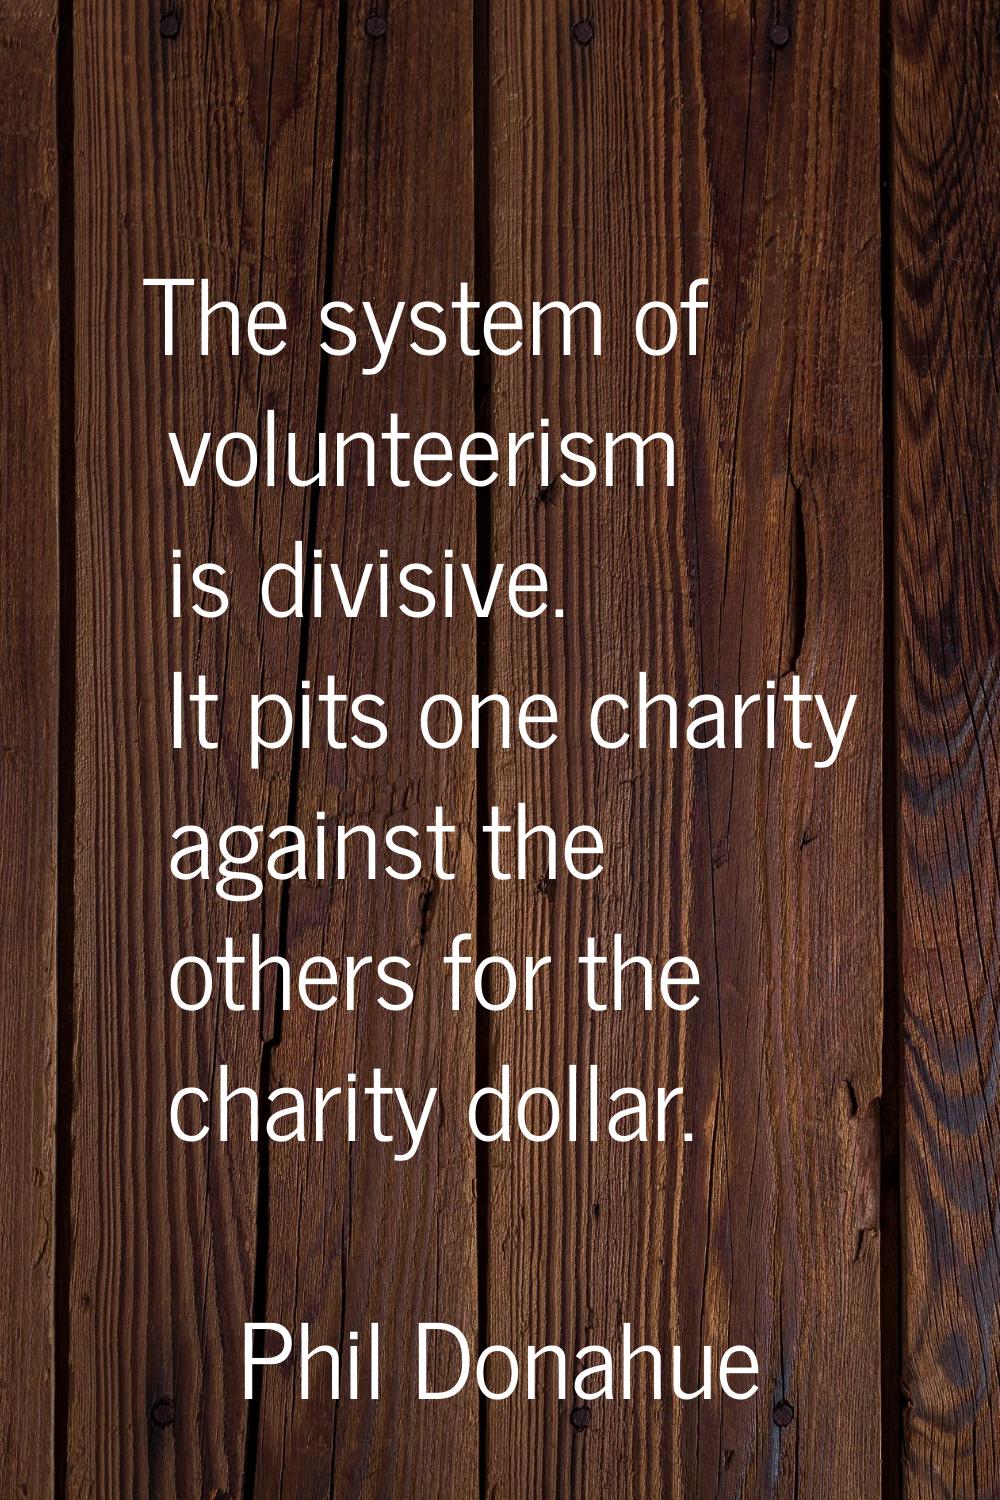 The system of volunteerism is divisive. It pits one charity against the others for the charity doll